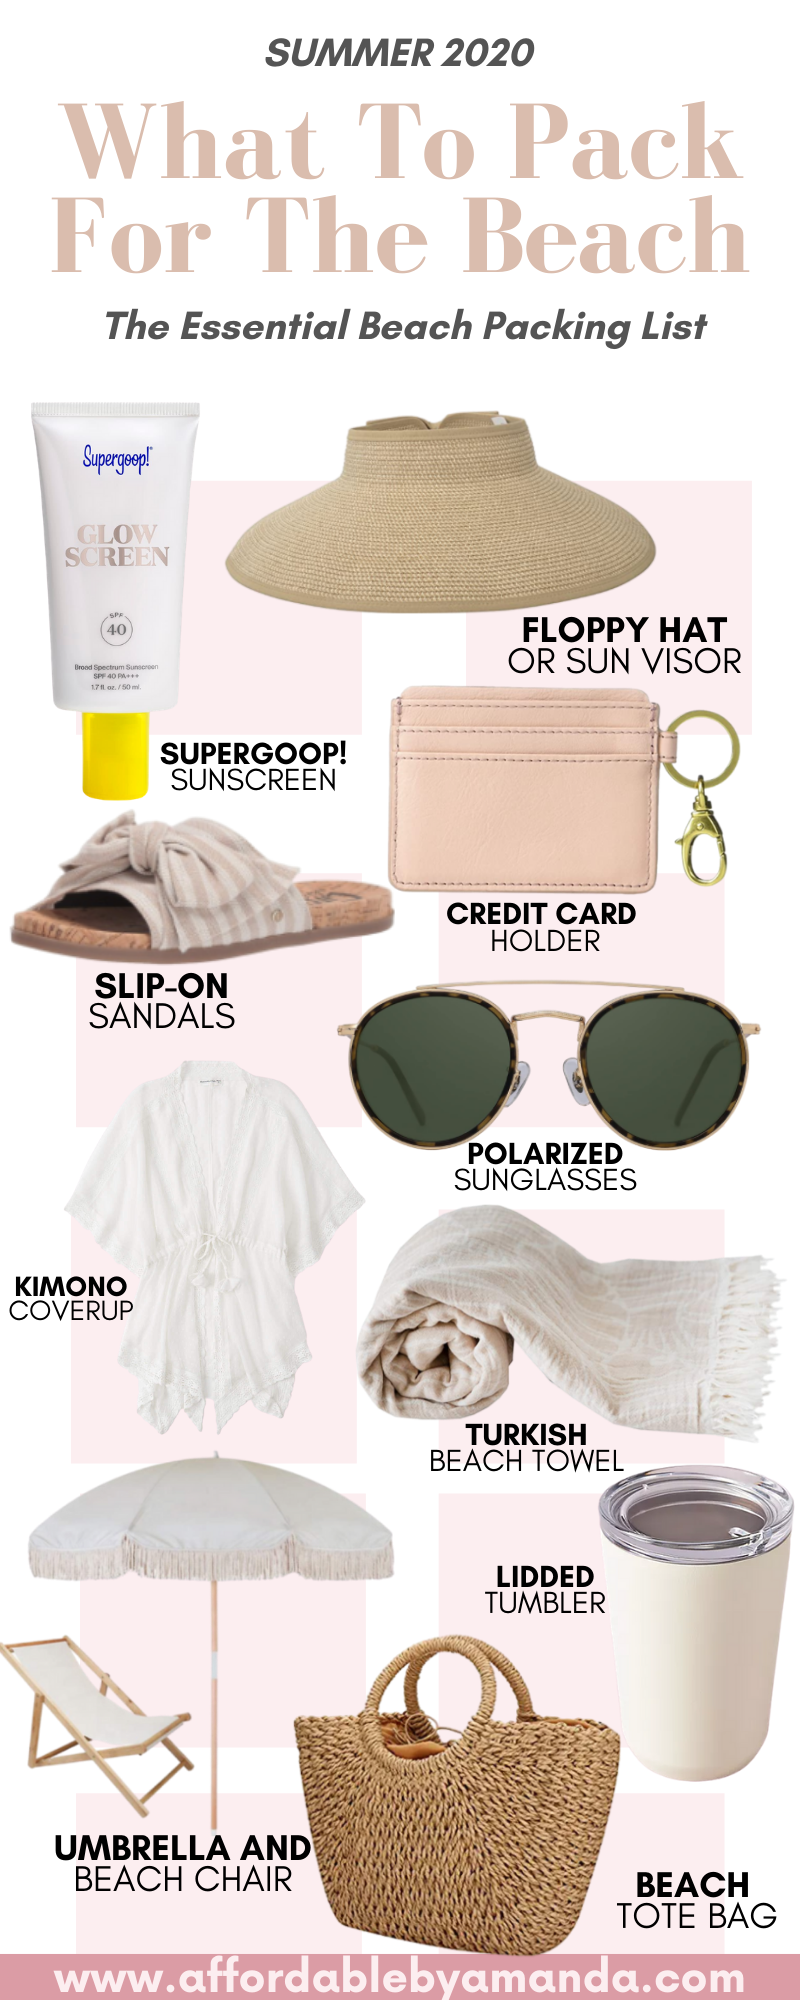 Summer 2020 | What to Pack for the Beach | The Essential Beach Packing List | Affordable by Amanda, Florida Style Blogger Shares Her Beach Day Essentials.